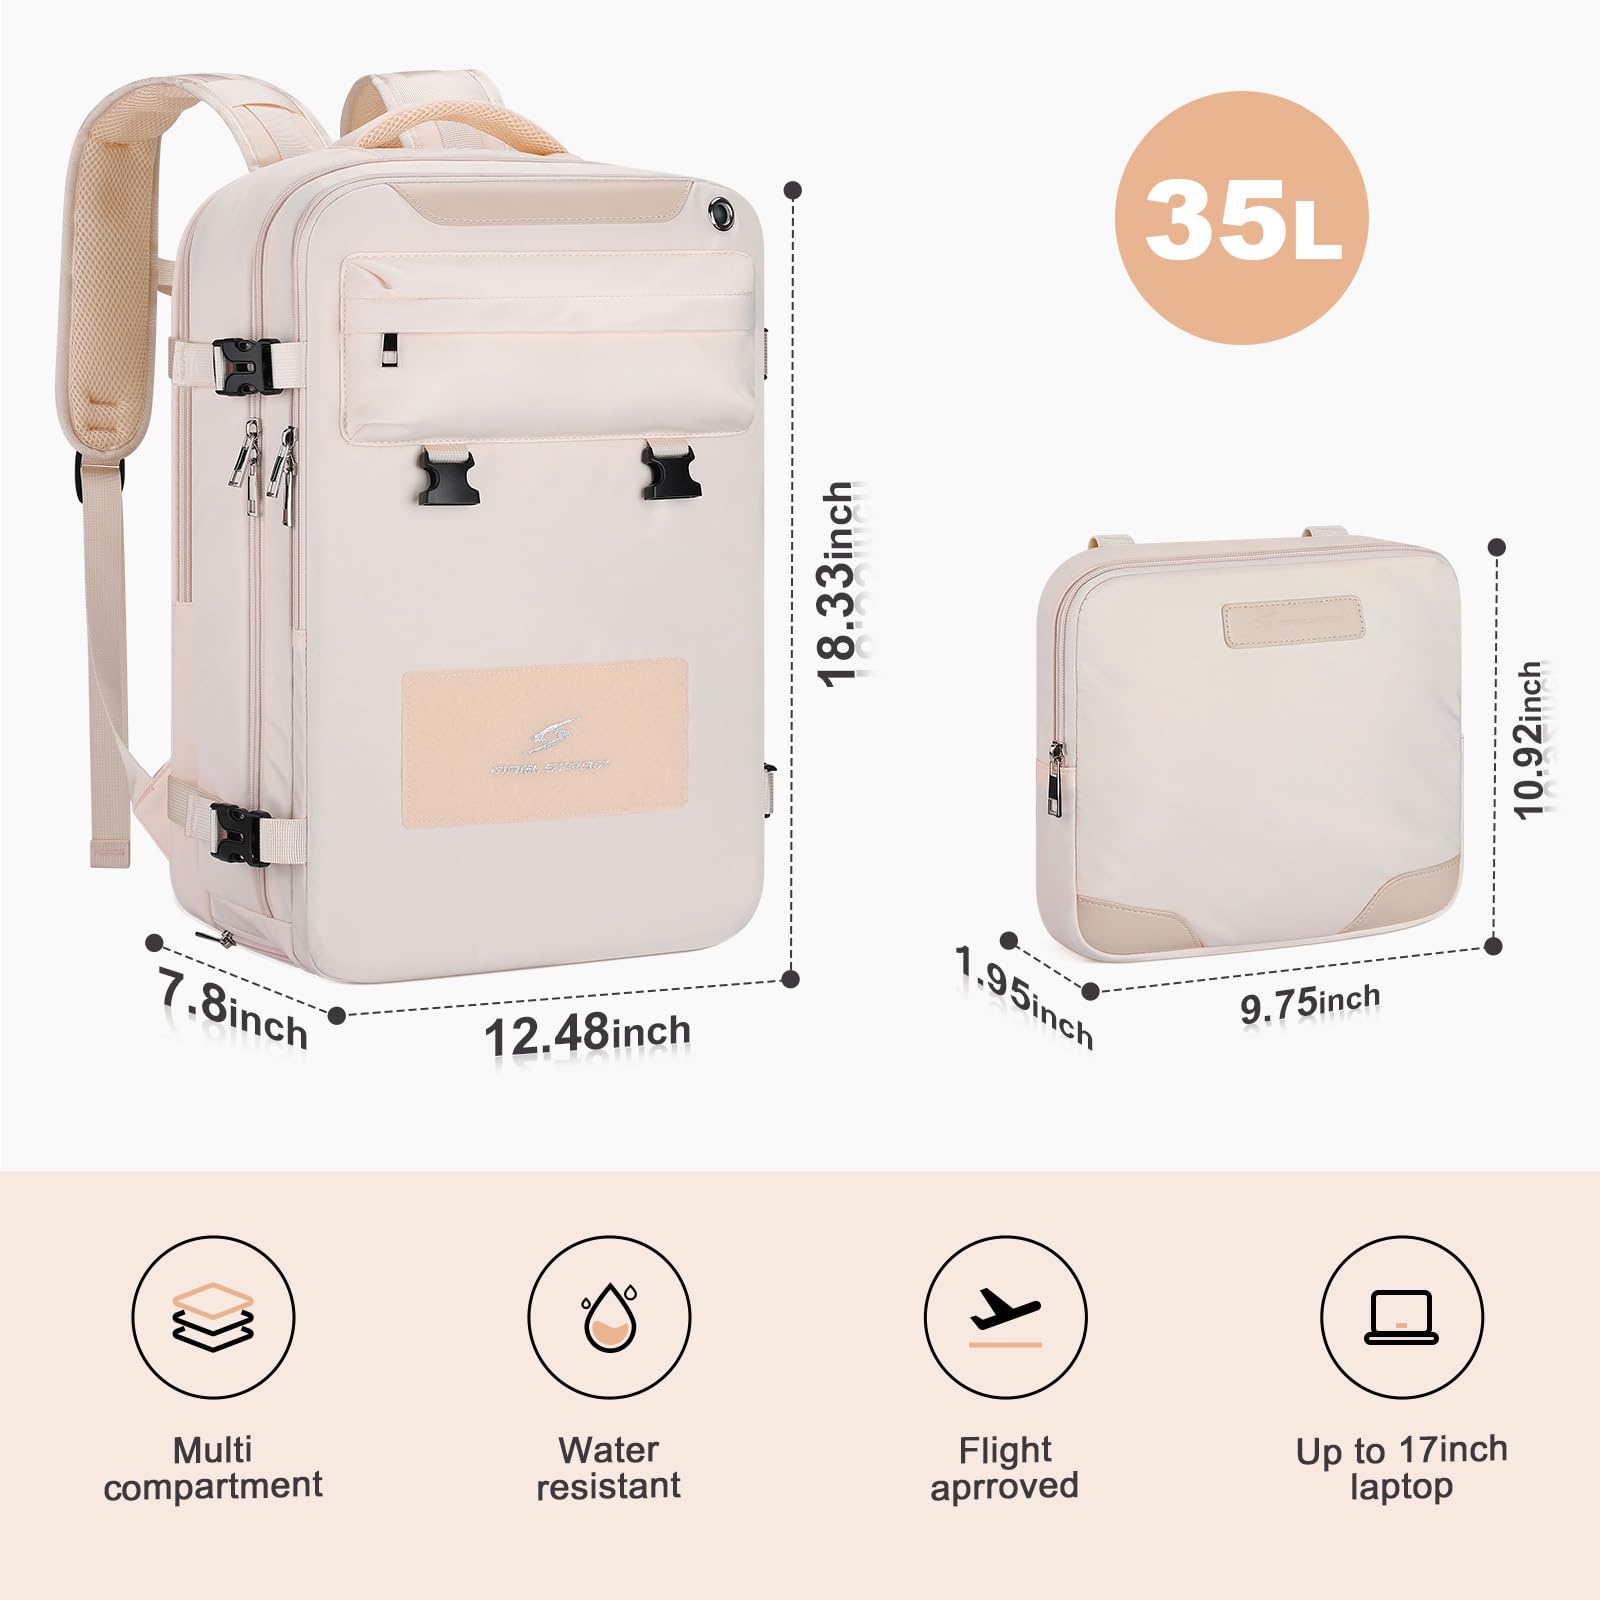 Maelstrom Travel Backpack for Women Men,35L Laptop Backpack Fits 17-Inch Laptop,Waterproof Carry On Backpack for Airplanes with Detachable Crossbody Bag&Shoe Compartment,Beige, Large